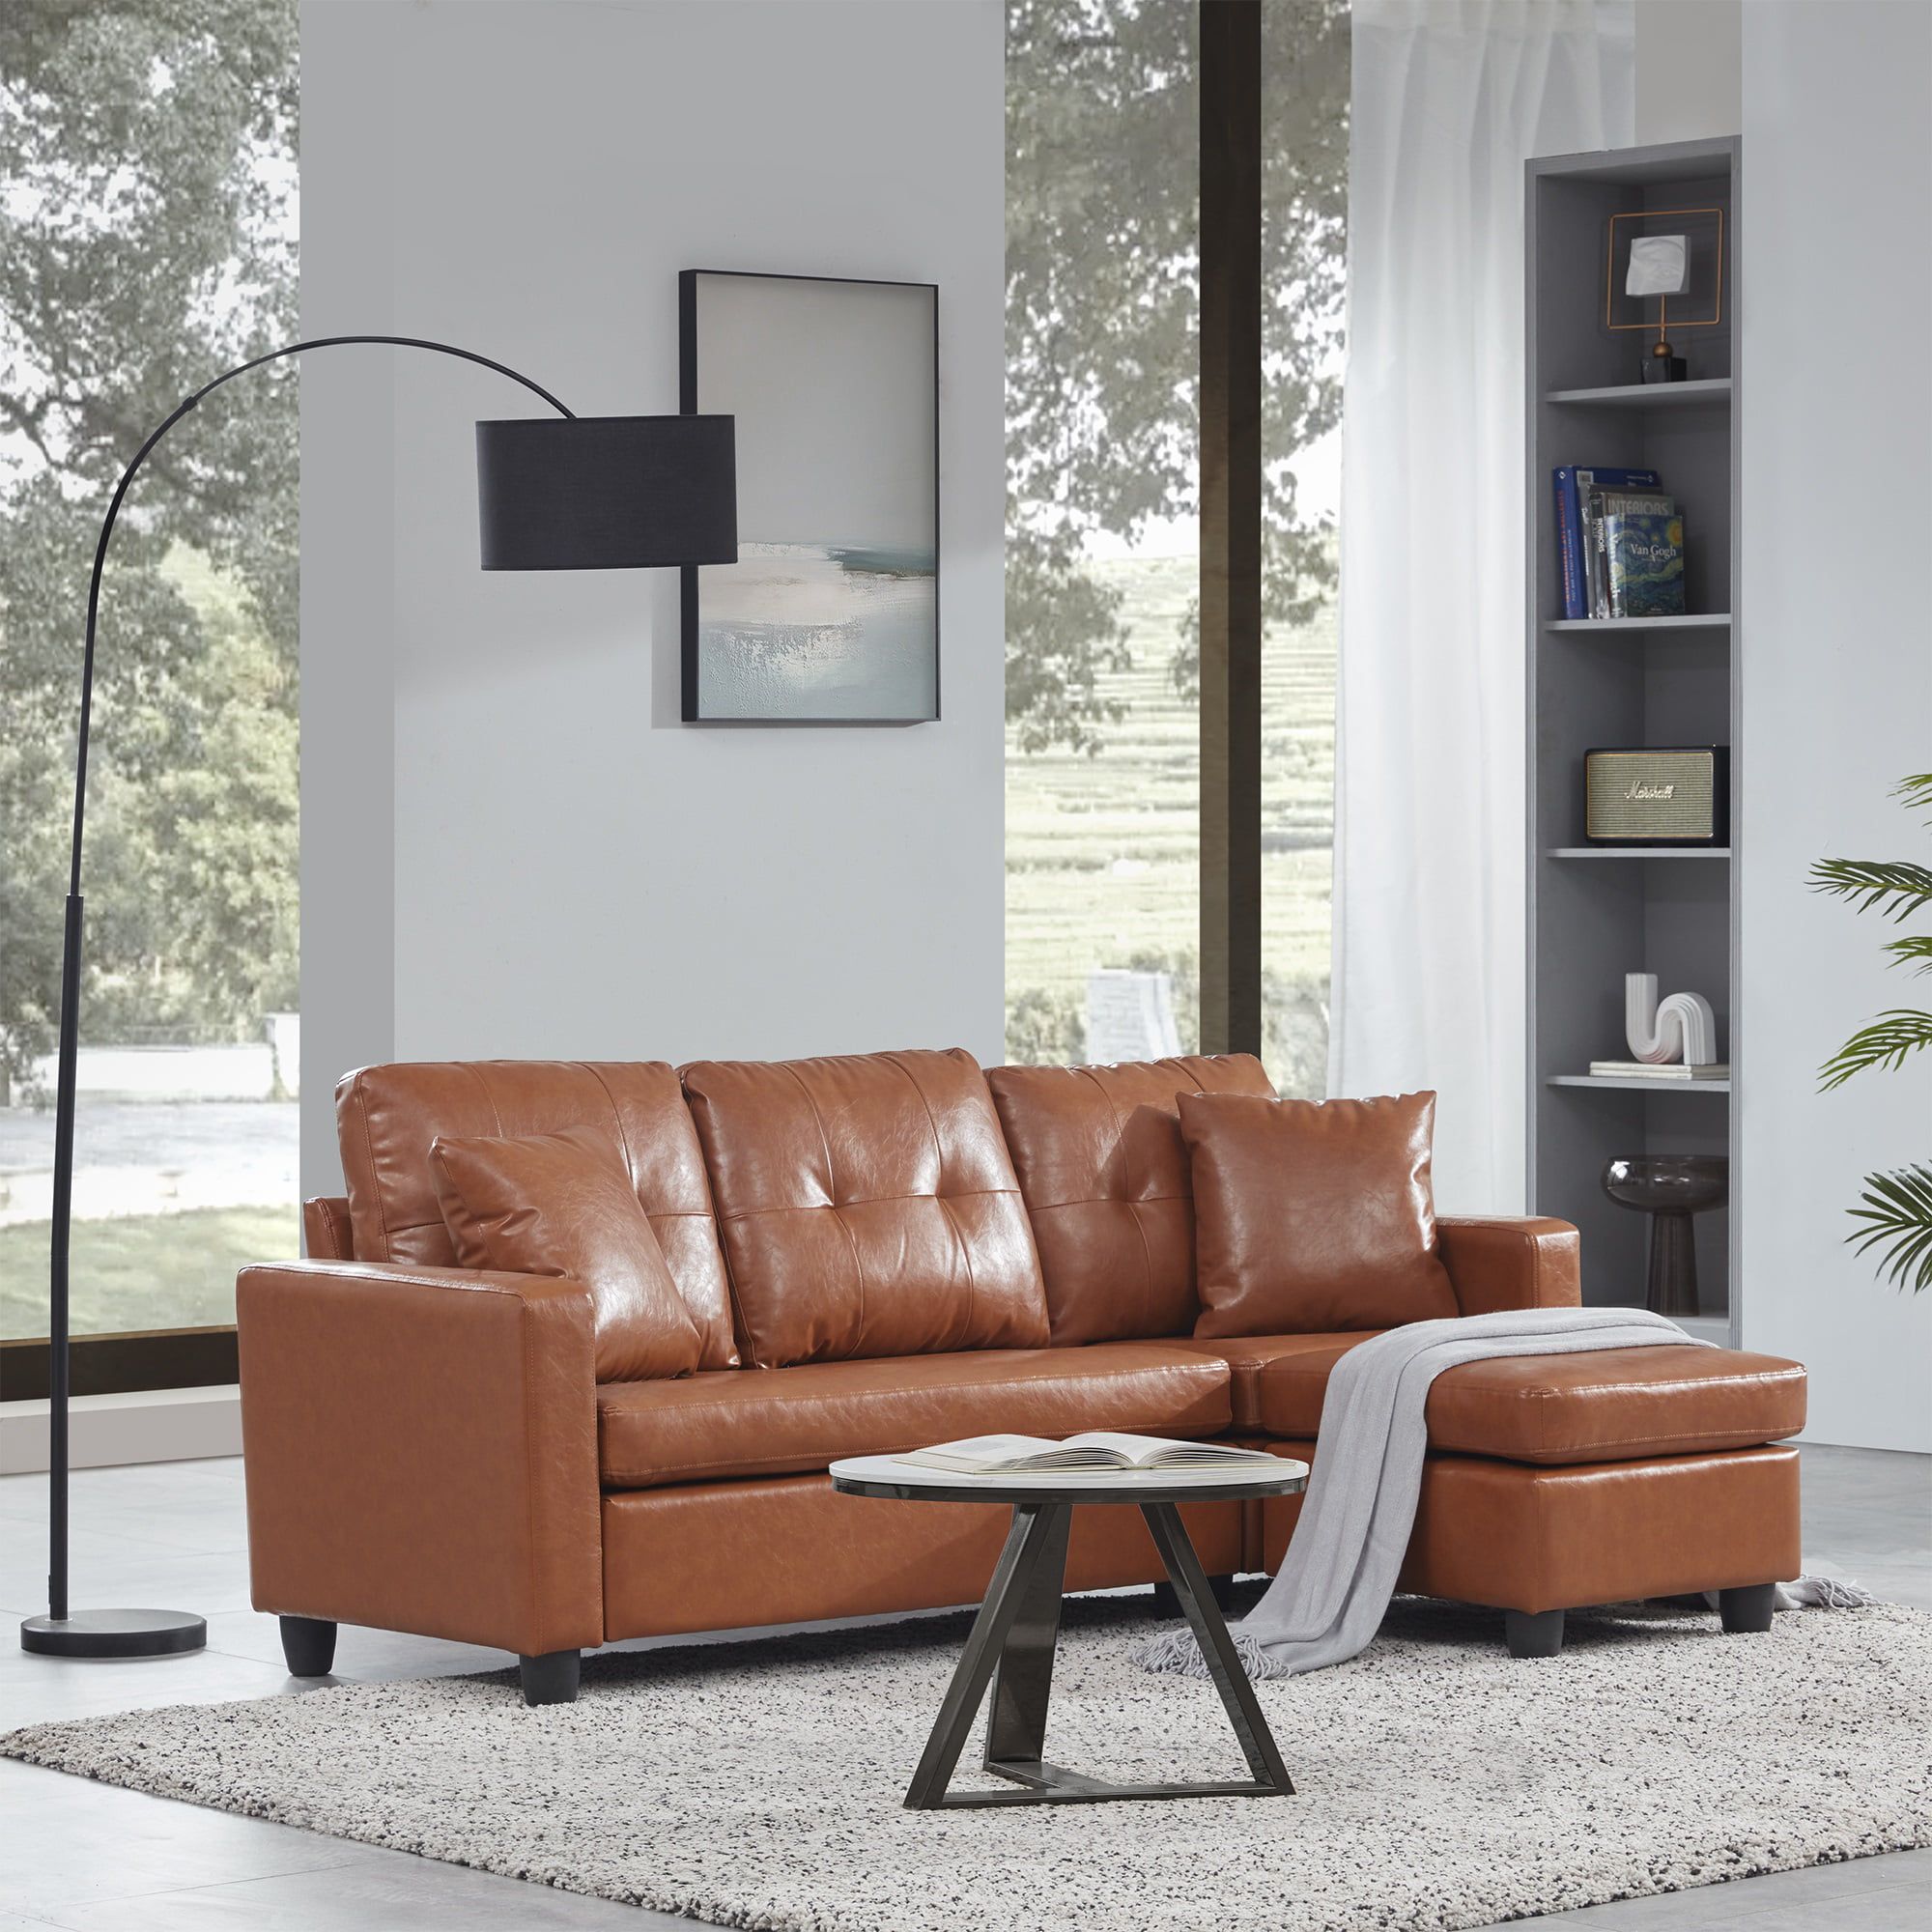 Belleze Altera Convertible Sectional Sofa, Modern Faux Leather L Shaped Couch  3 Seat With Reversible Chaise For Small Space, Caramel – Walmart In 3 Seat Convertible Sectional Sofas (View 8 of 15)